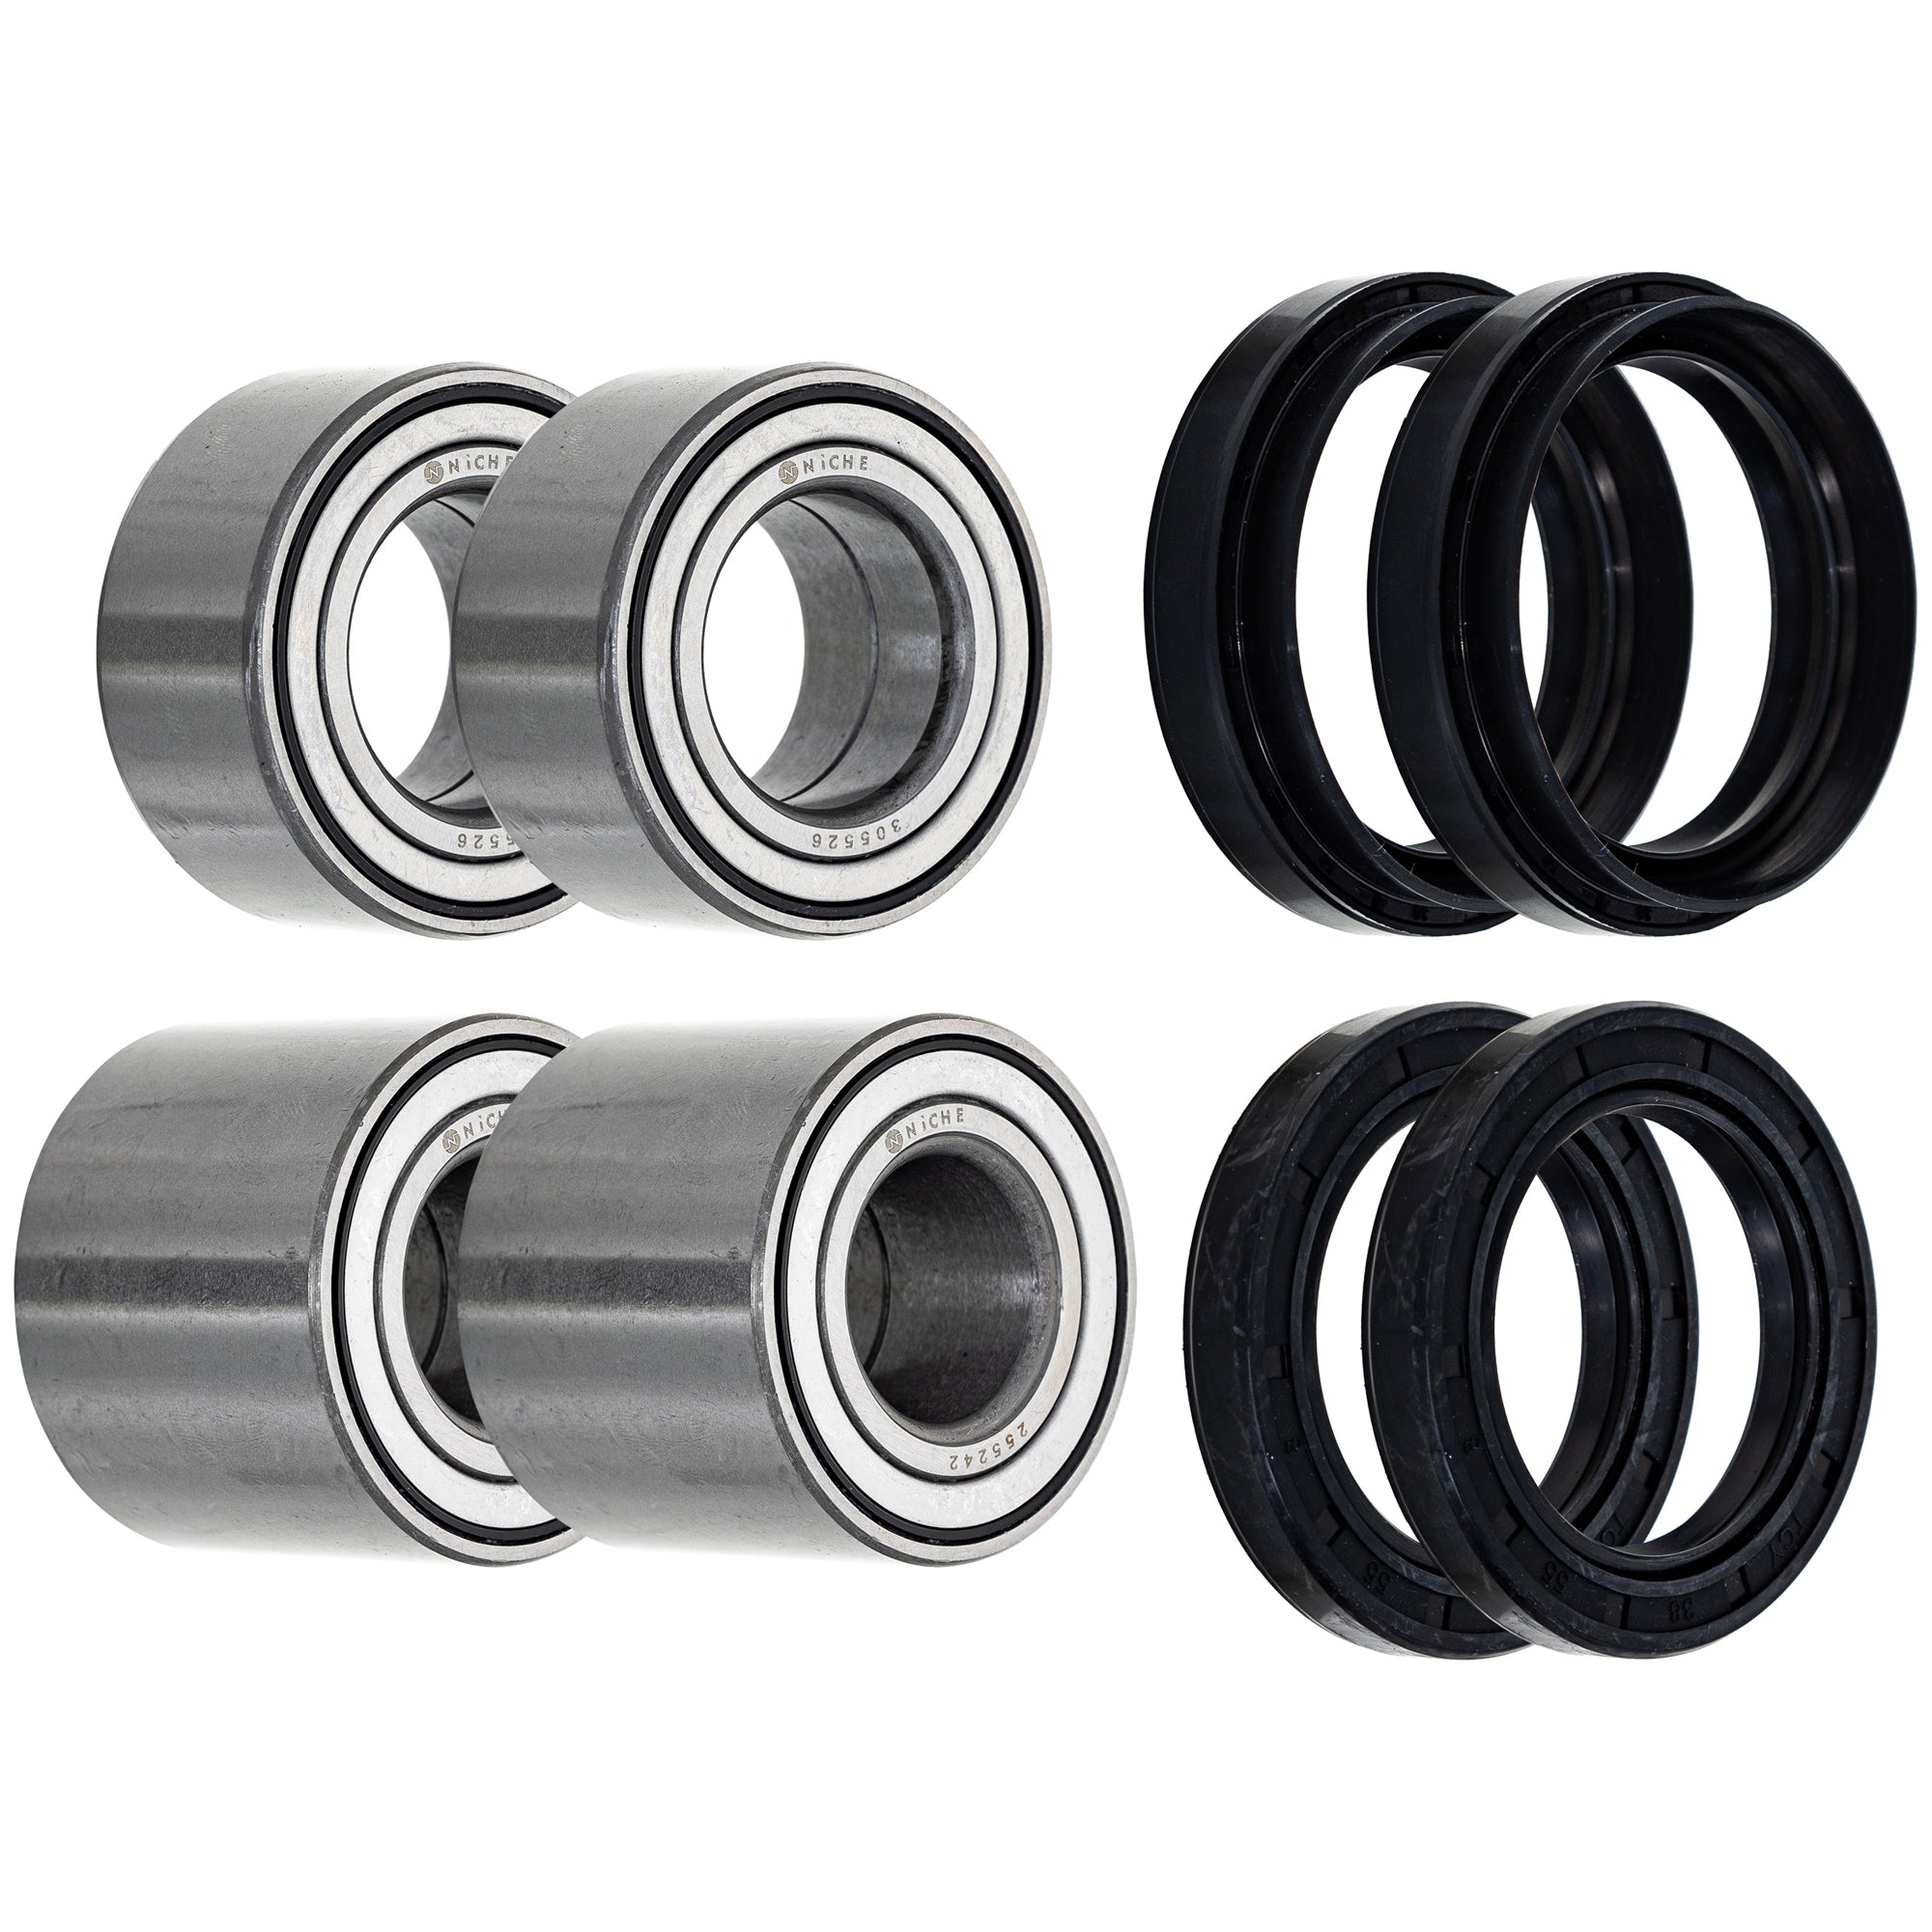 Wheel Bearing Seal Kit for zOTHER Brute NICHE MK1008390